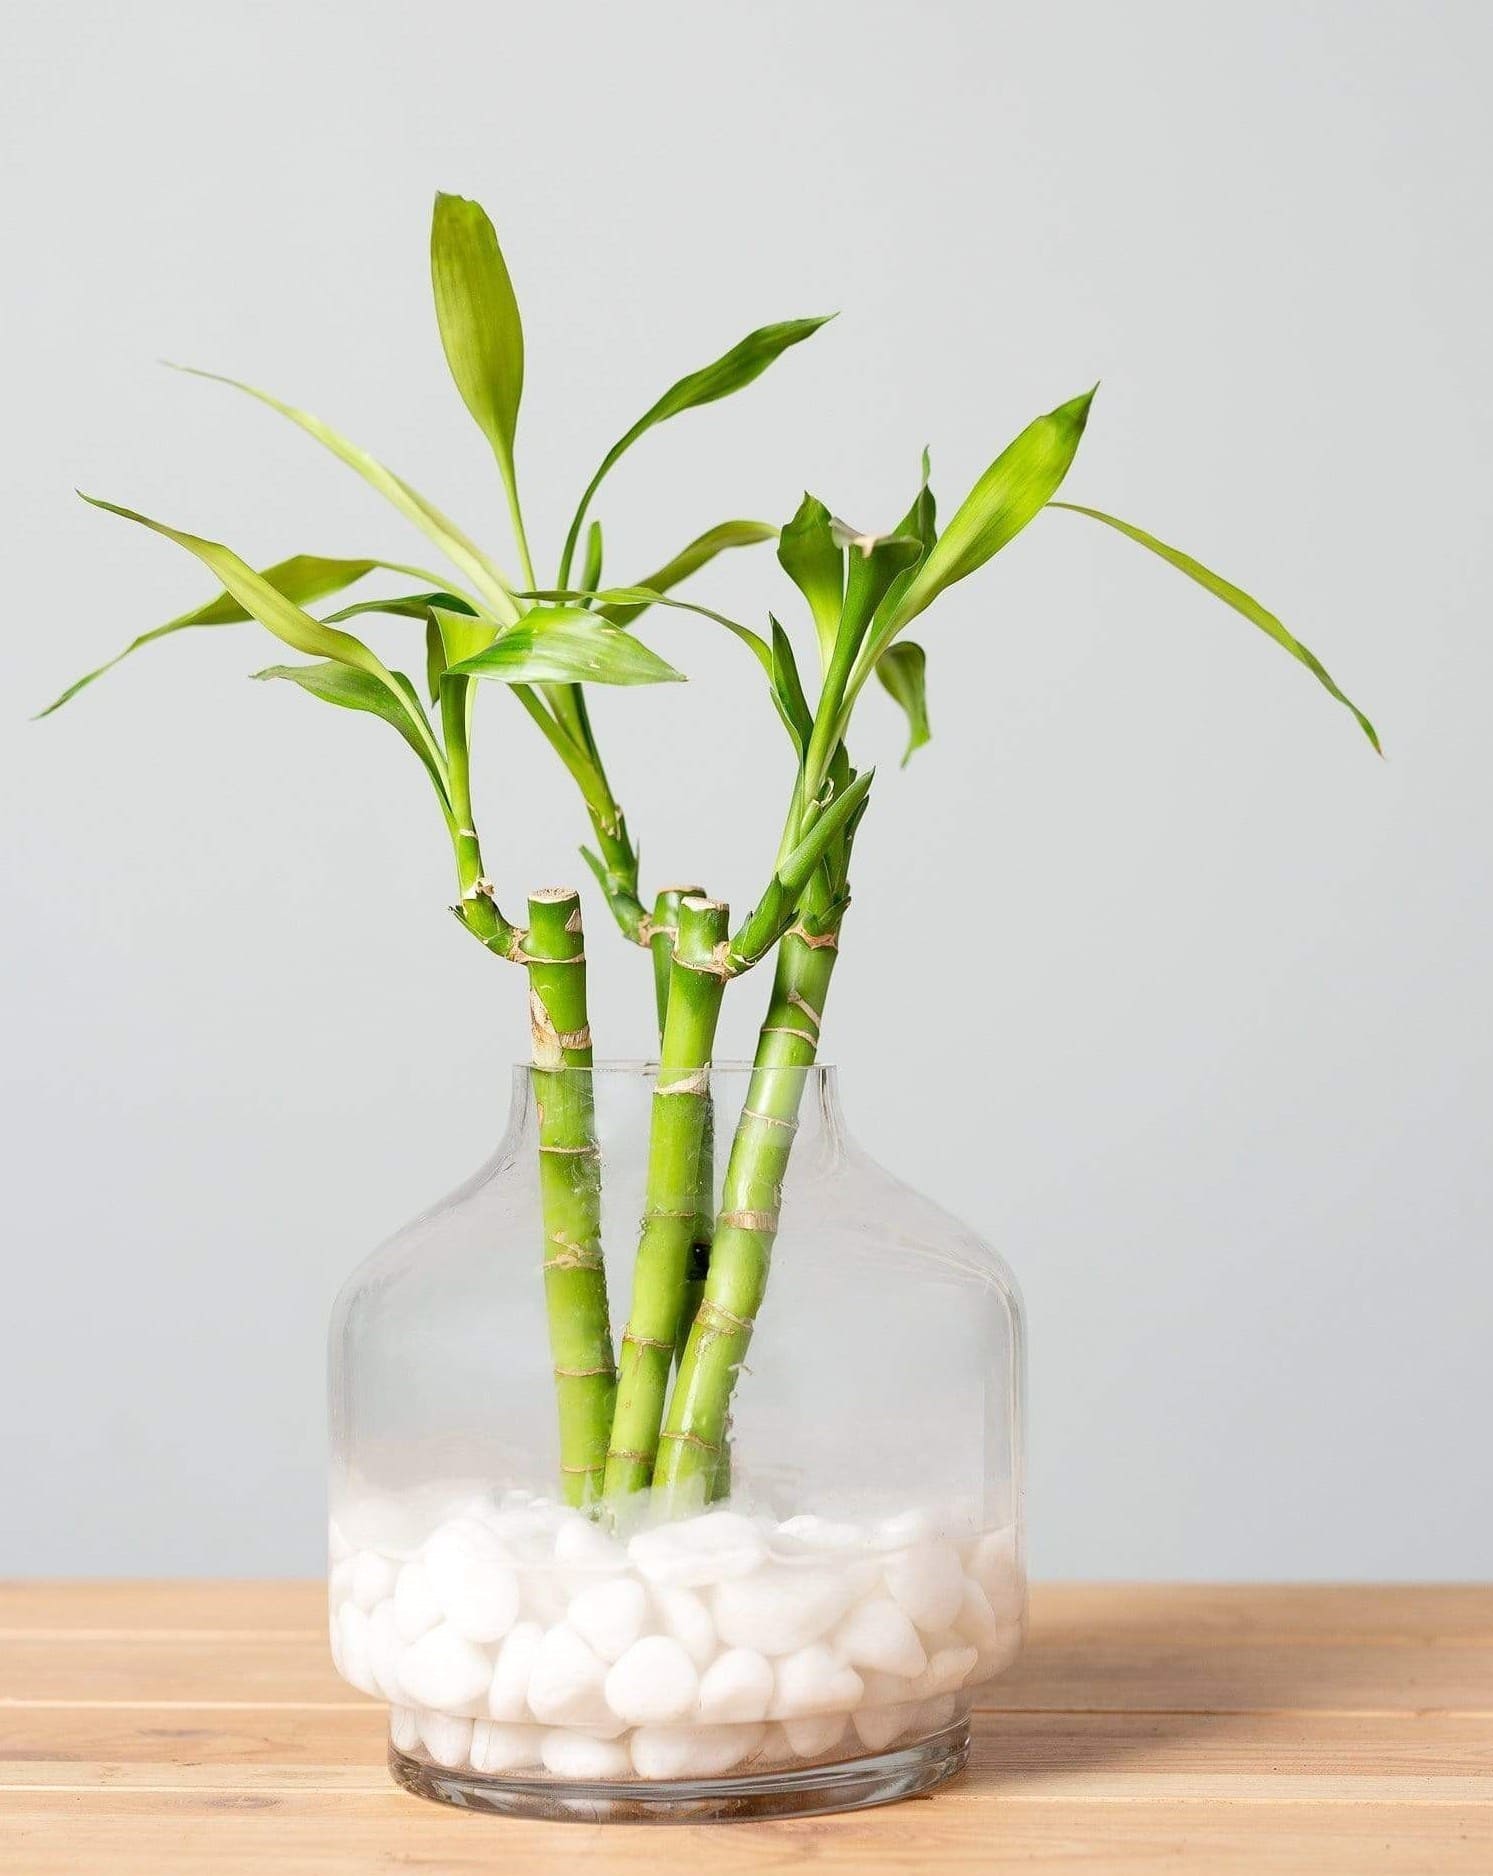 14 beautiful lucky bamboo varieties to take home - 97